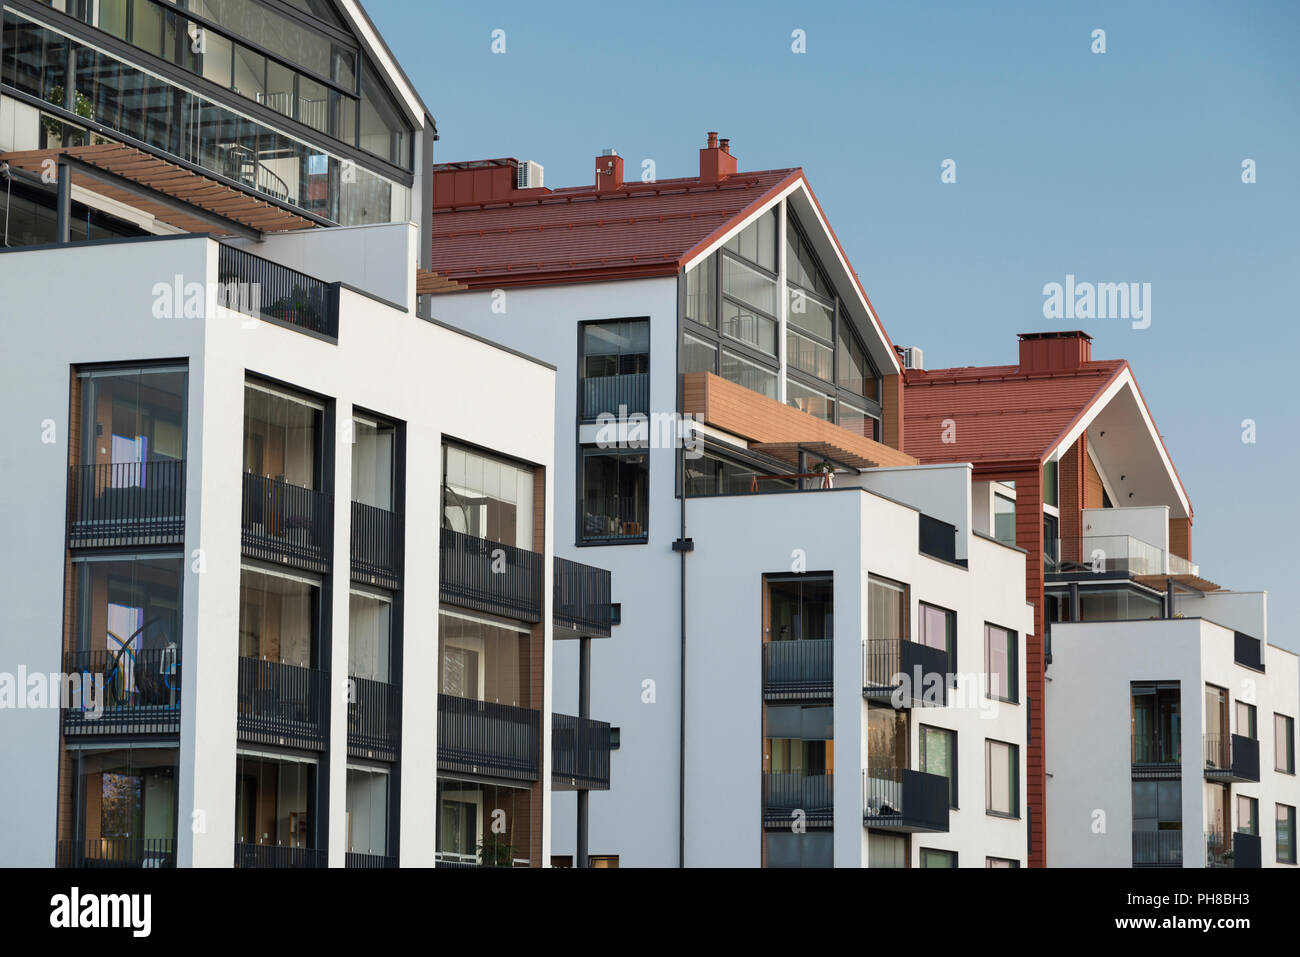 Residential buildings in Oulu, Finland Stock Photo